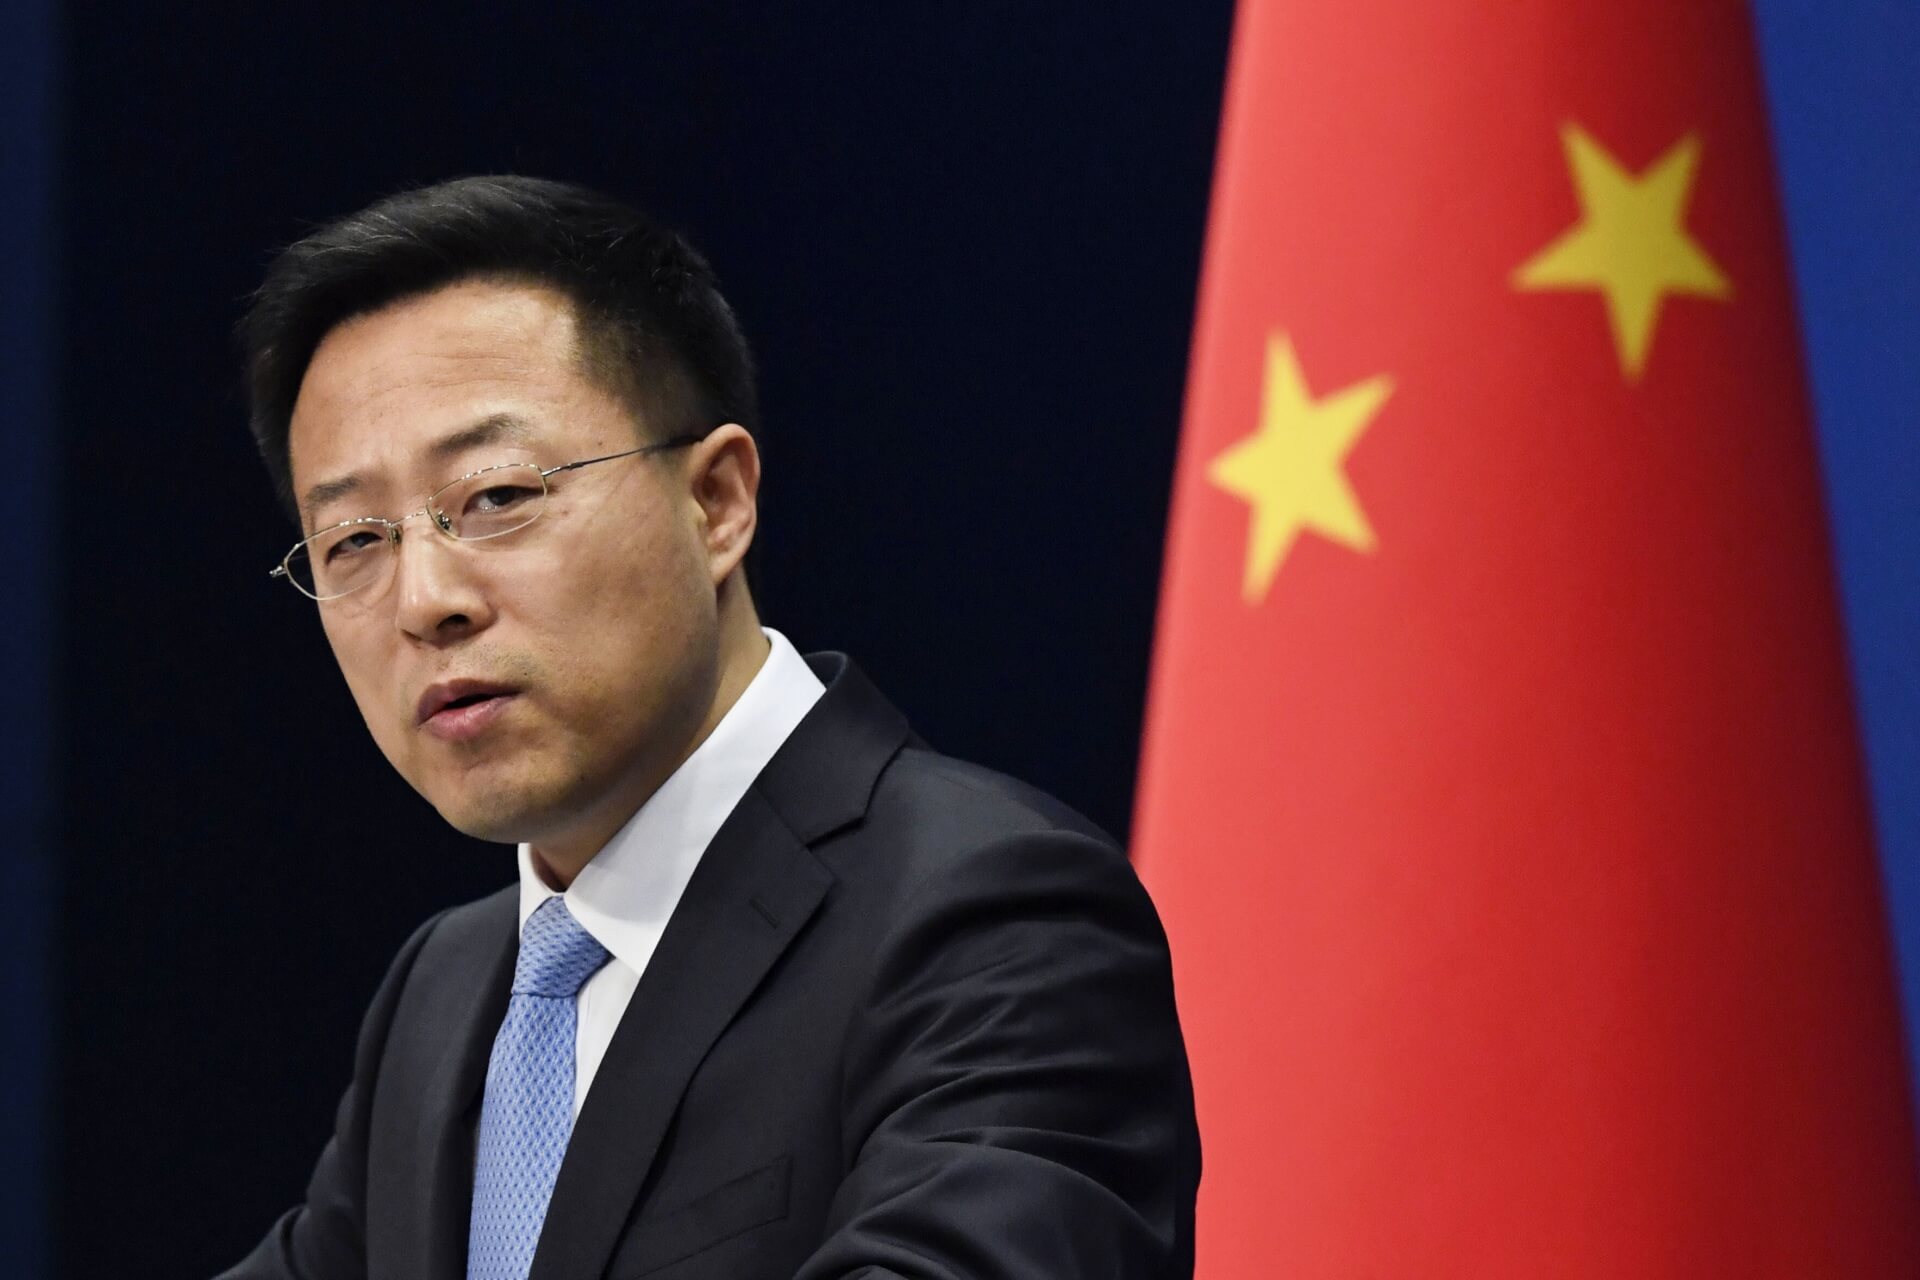 China Defends CPEC, Says It Will Not Affect Its “Principled” Position on Kashmir